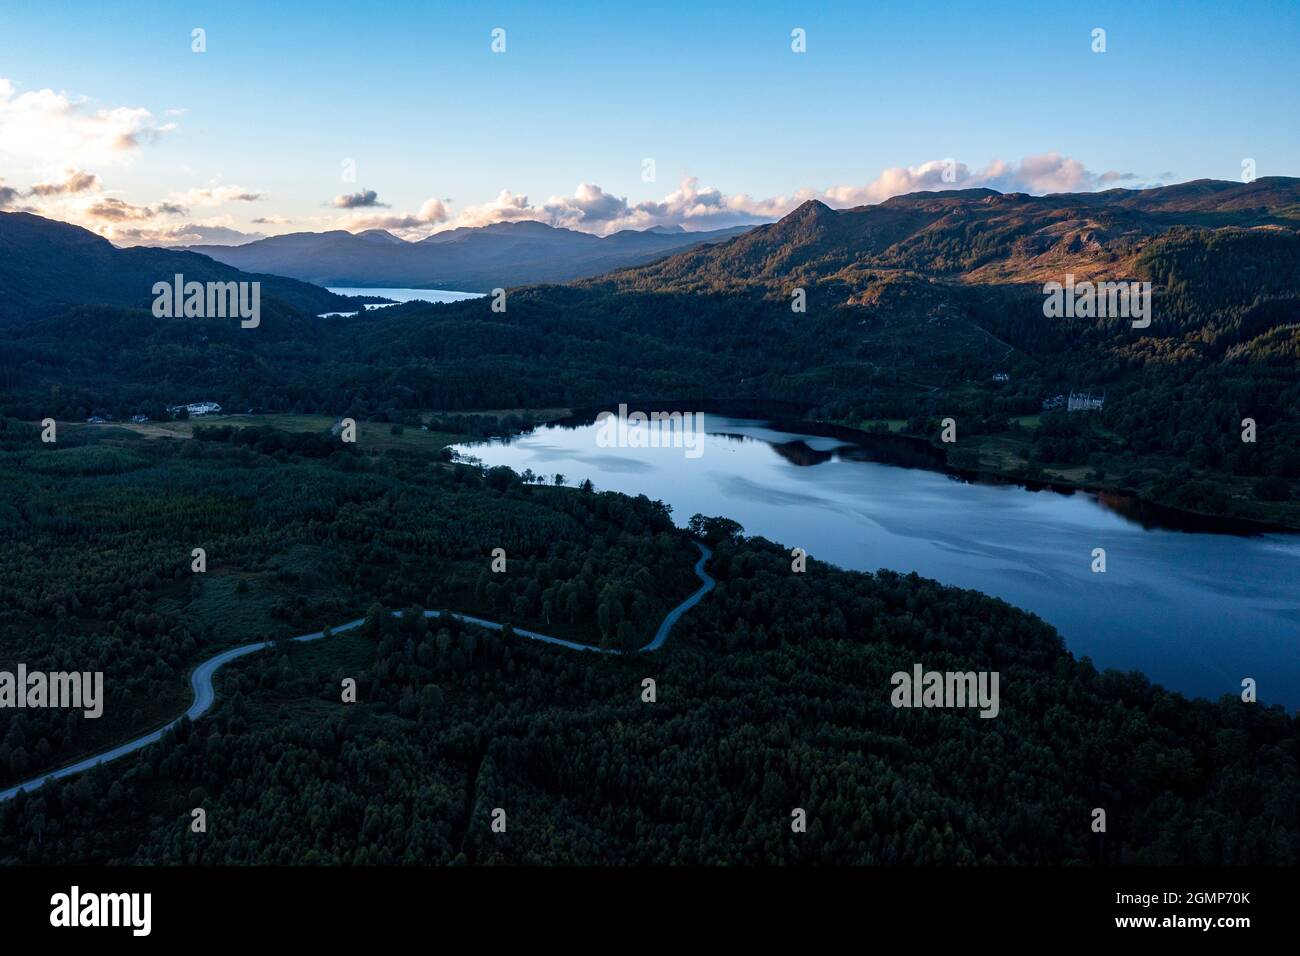 Loch Achray, Aberfoyle and Loch Achray, Loch Lomond and Trossachs National Park, Scotland, UK. 19th Sep, 2021.  PICTURED: Drone view Loch Achray and on of the road known as Dukes Pass which is the A821 linking the very popular tourist Heart 200 Route. This is a busy with outdoor enthusiasts and day trippers looking to escape the city and get into scenic Scottish countryside.  Credit: Colin Fisher Stock Photo